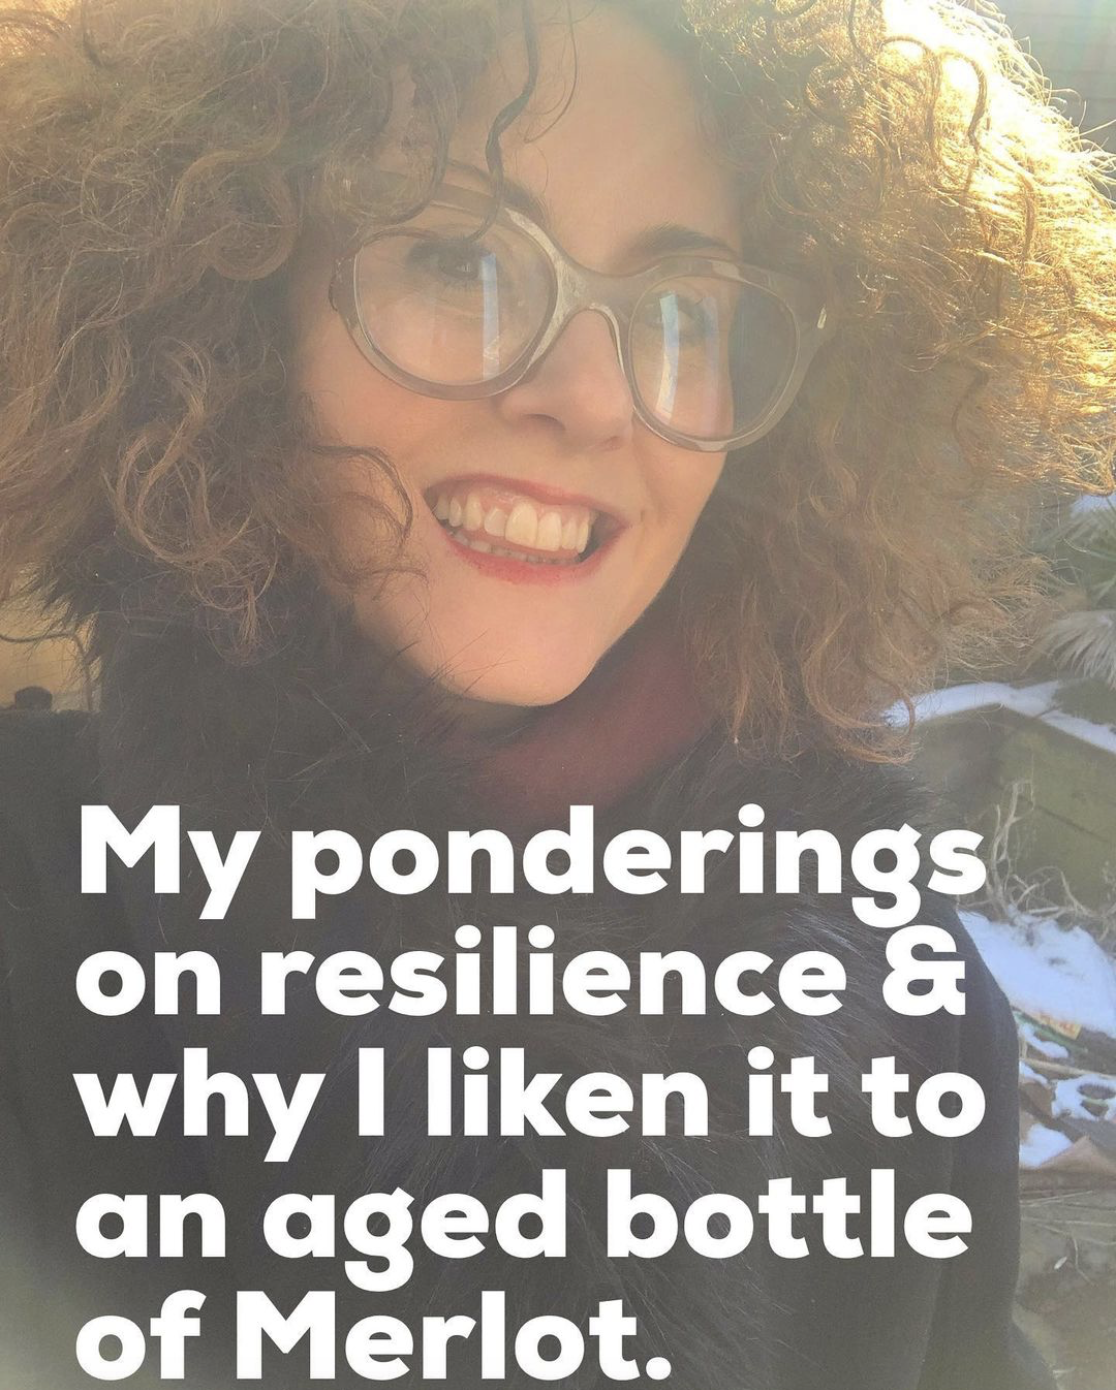 My ponderings on resilience & why I liken it to an aged bottle of Merlot